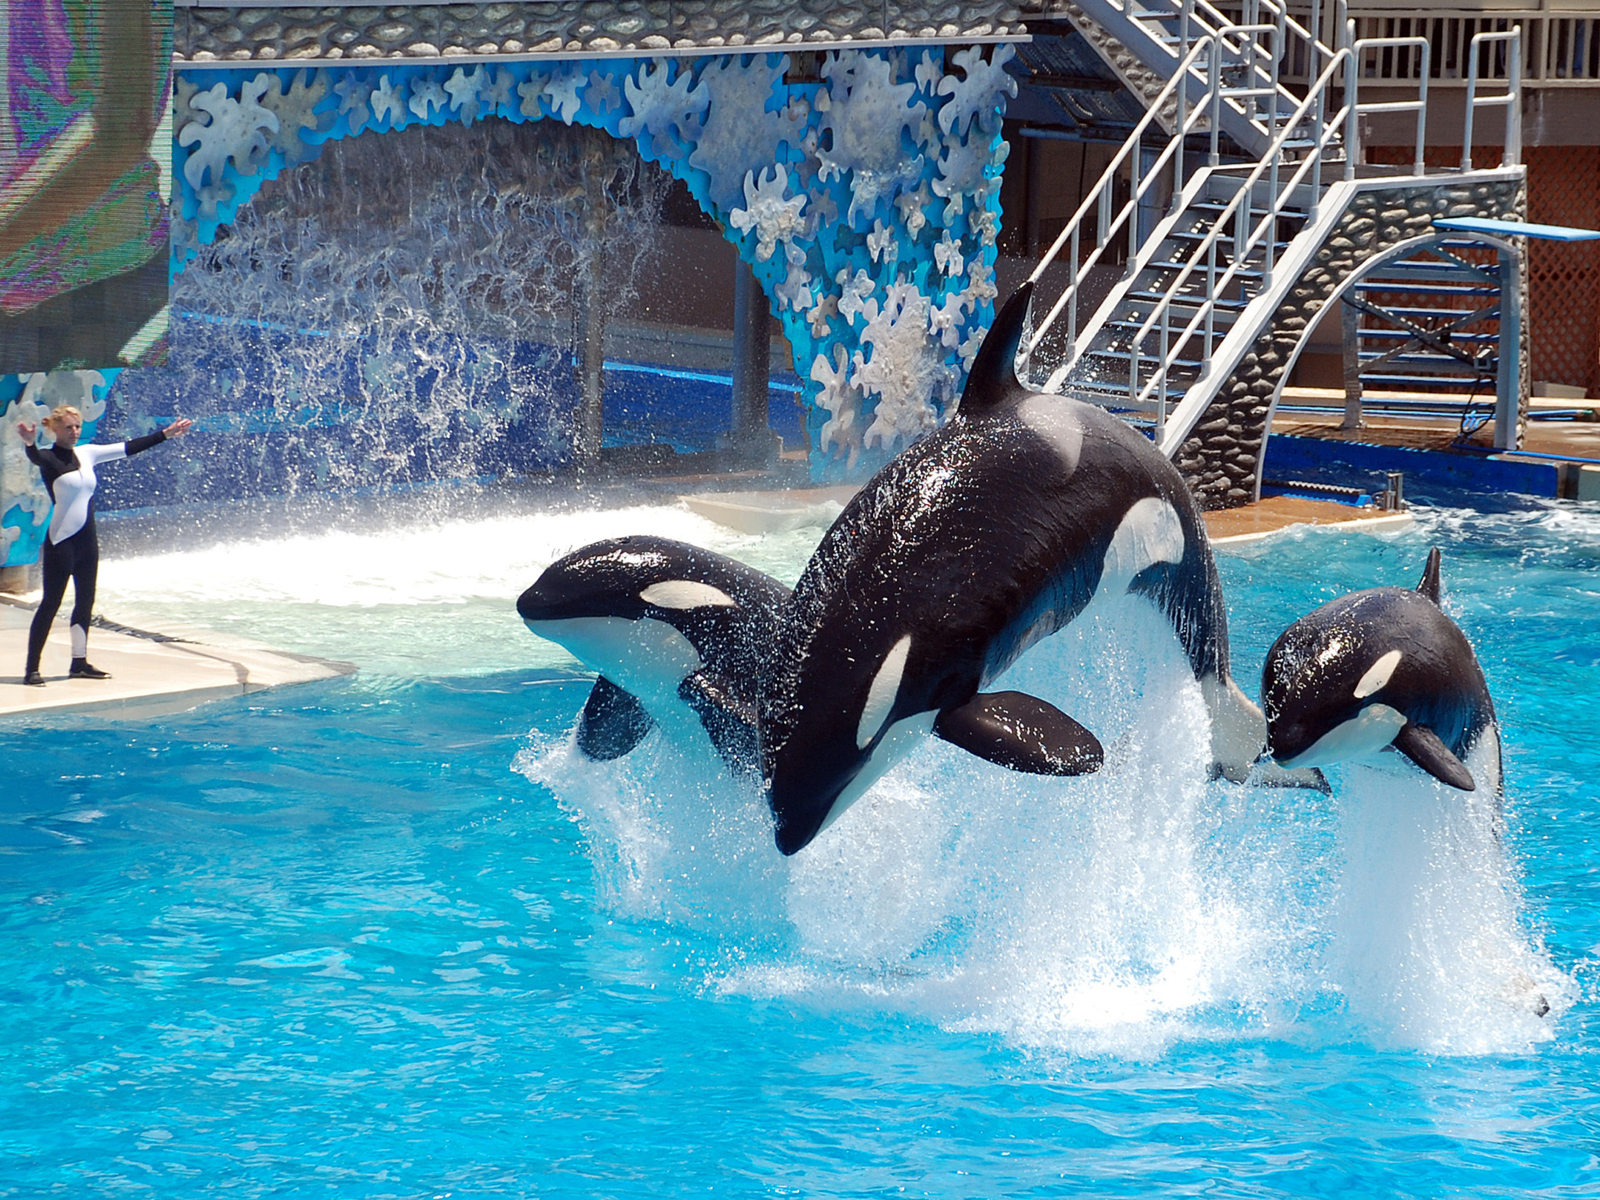 Three Killer Whales performing for a show and their trainer doing hand signals at the poolside of SeaWorld in San Diego, California, one of the best aquariums in the US